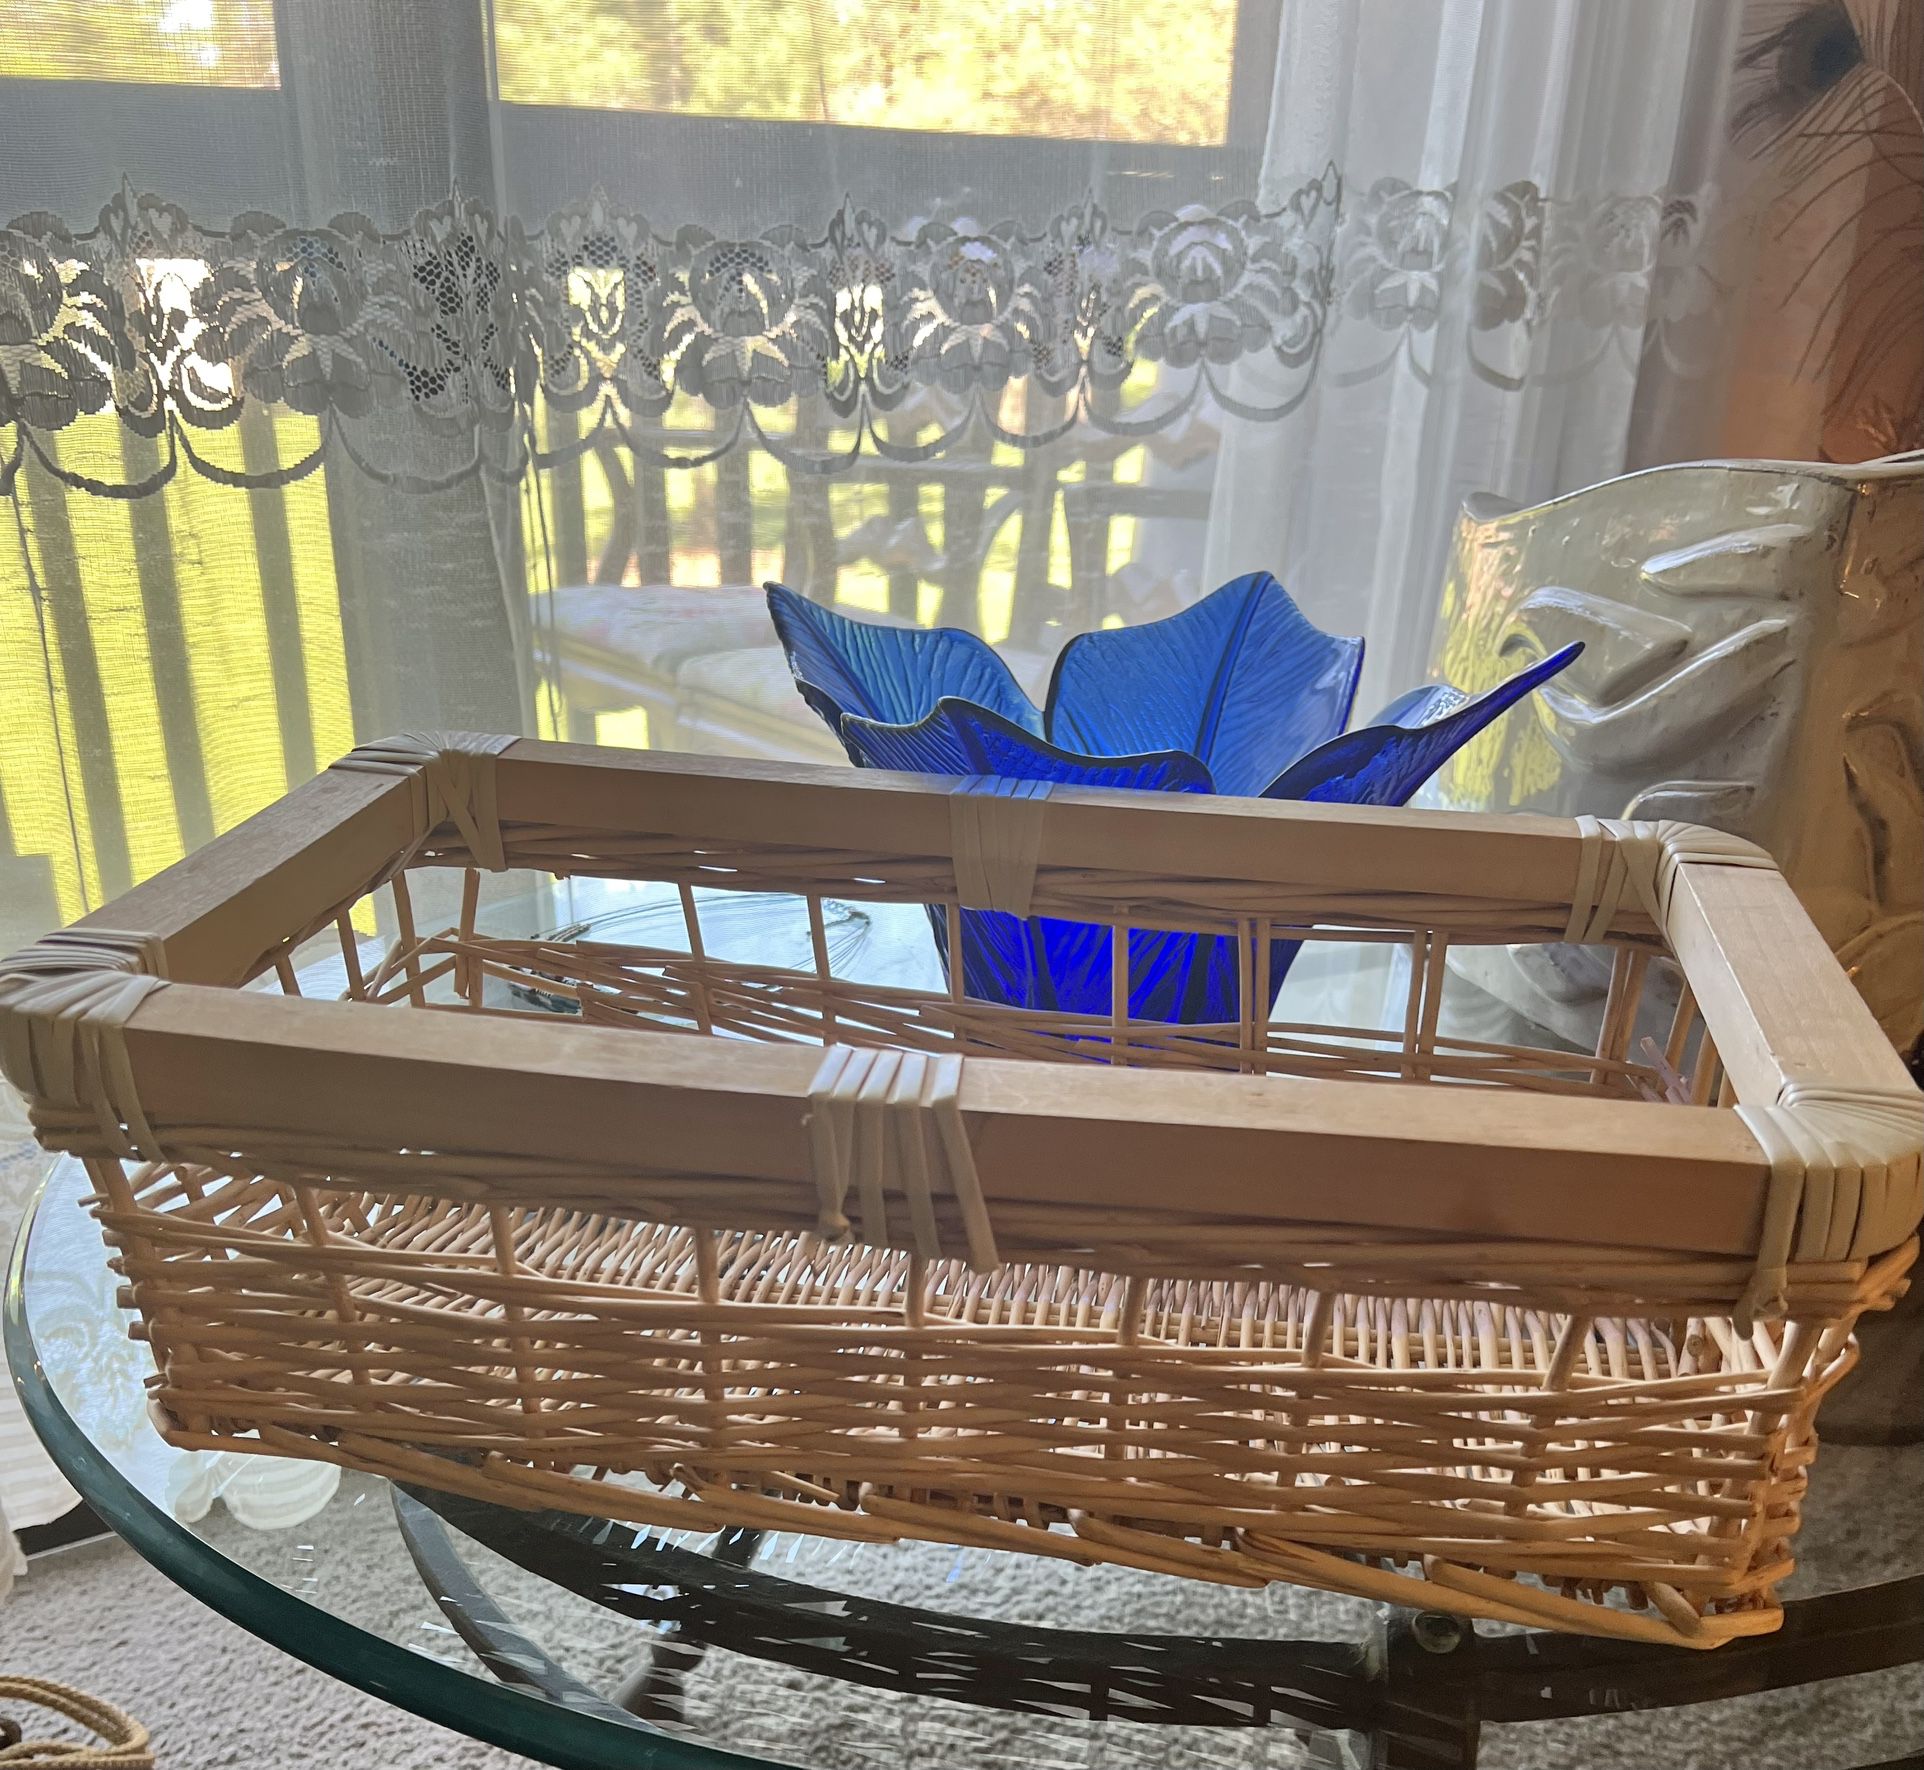 Xlarge Wood Wicker Basket For Catch All! 